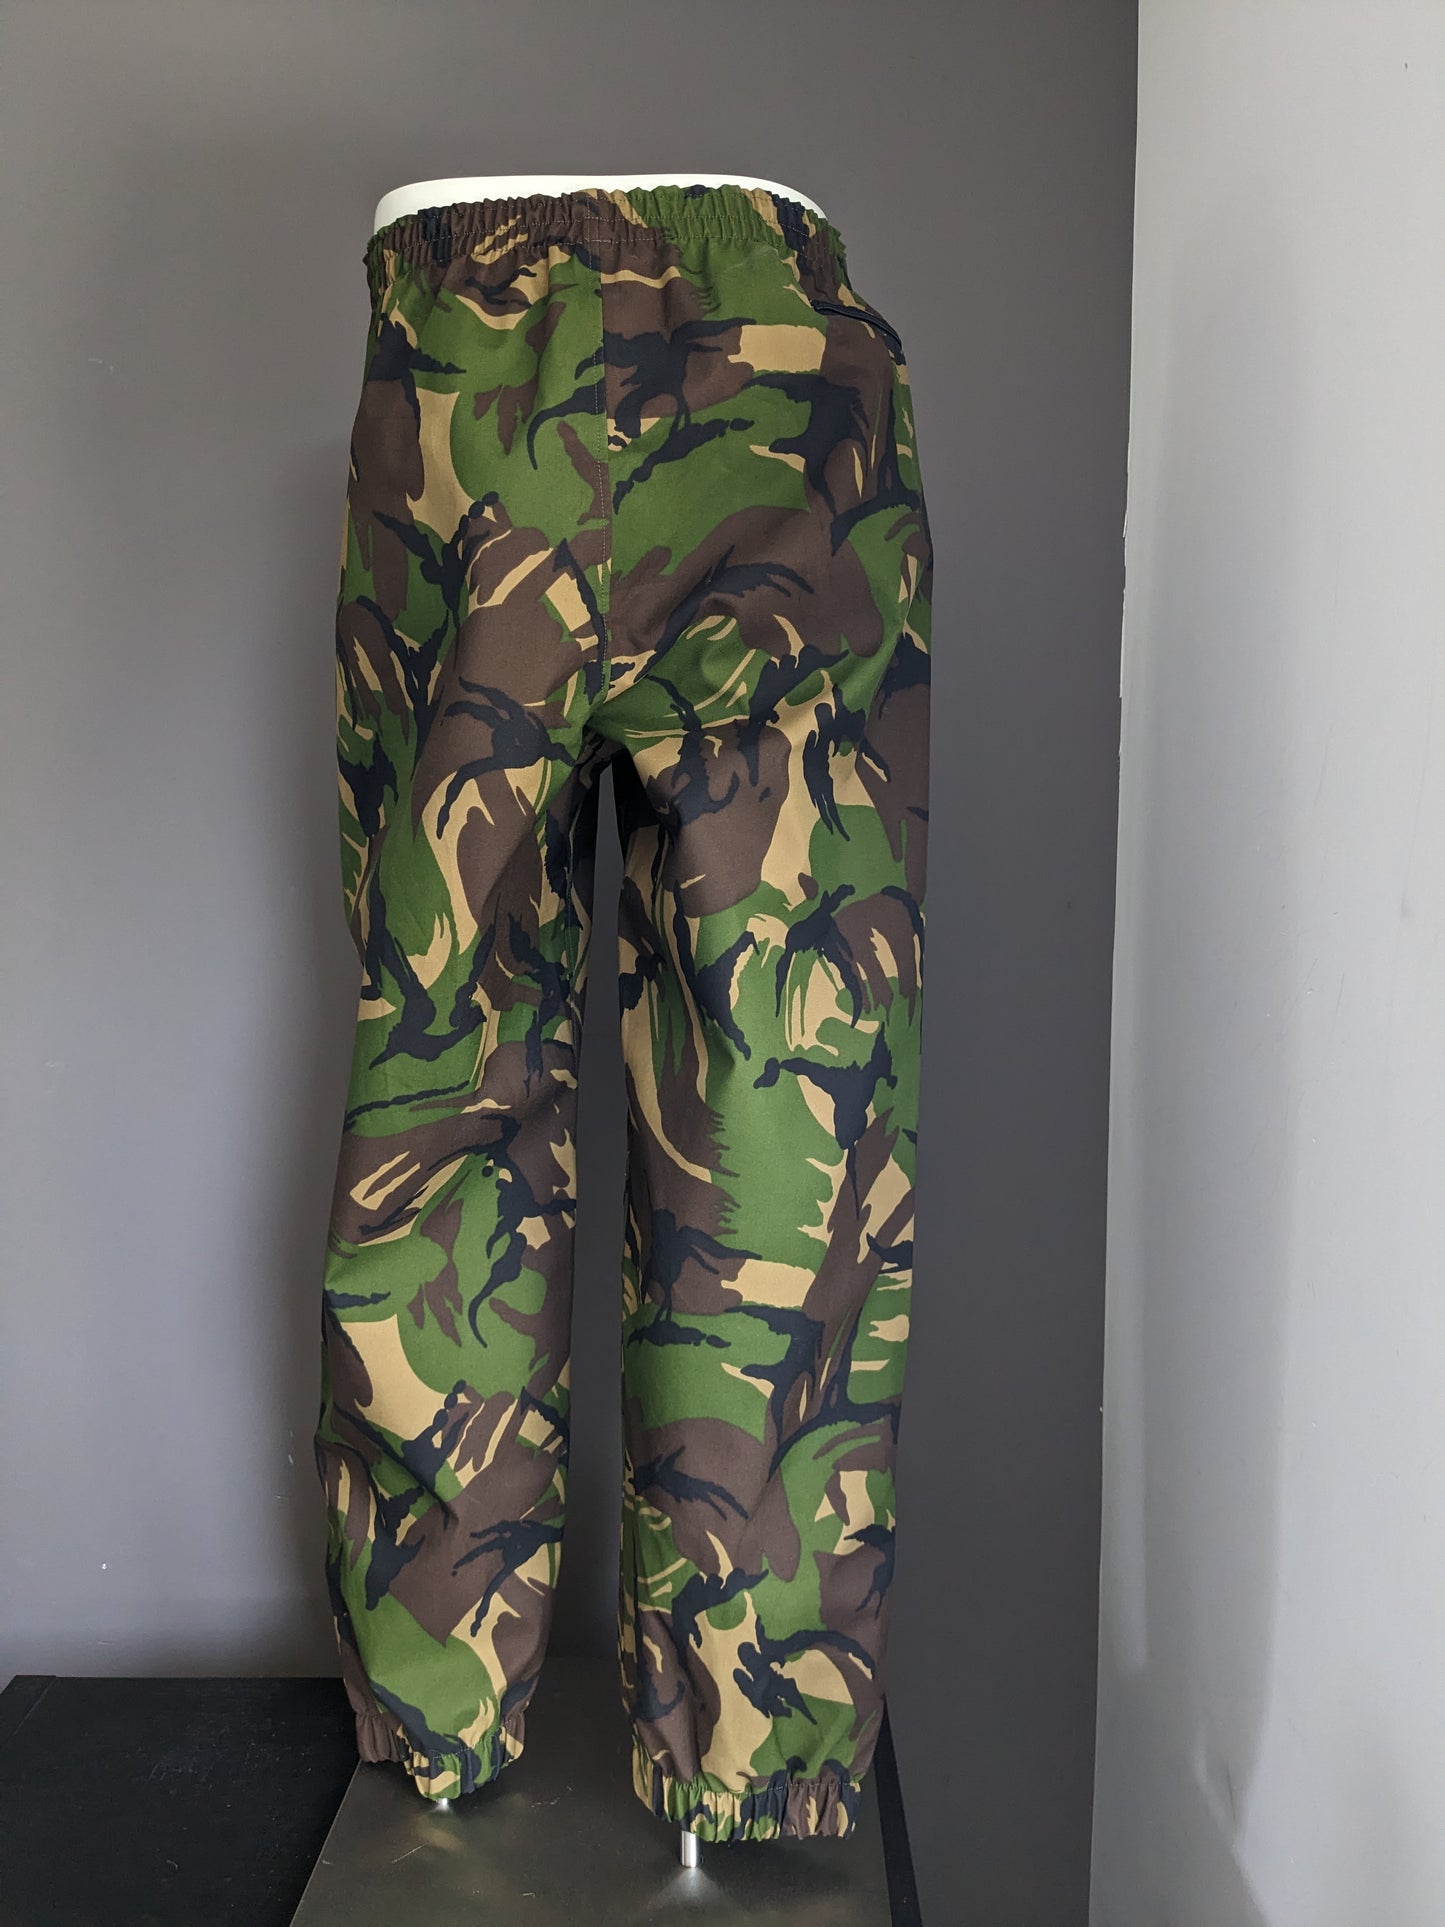 Army / army pants. Water repellent. Brown green black camouflage print. Size M.